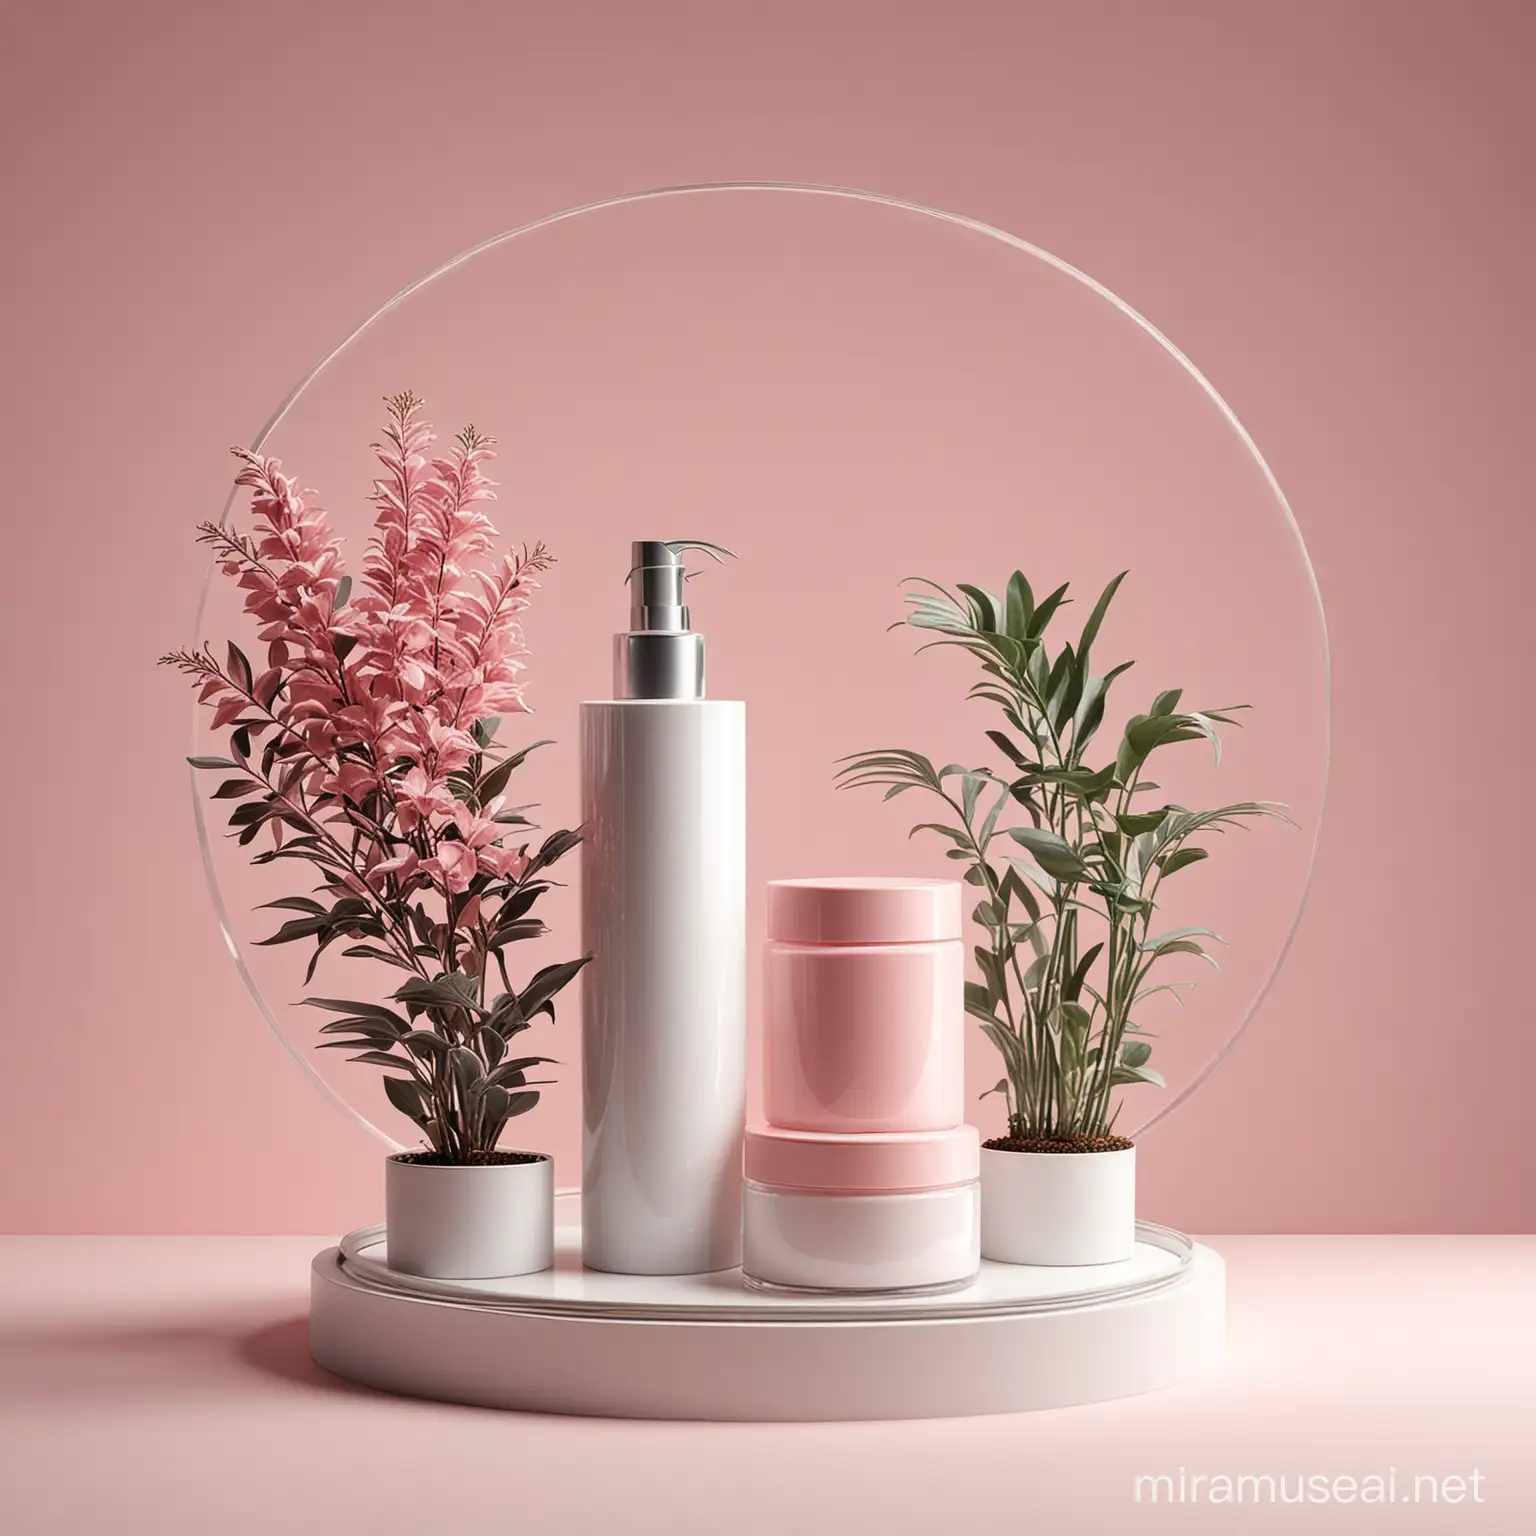 a very realistic composition of a stand and plants for a photo session of a cosmetic product. White and powder pink colors. There is space in the central part to place the product in a round glass container.